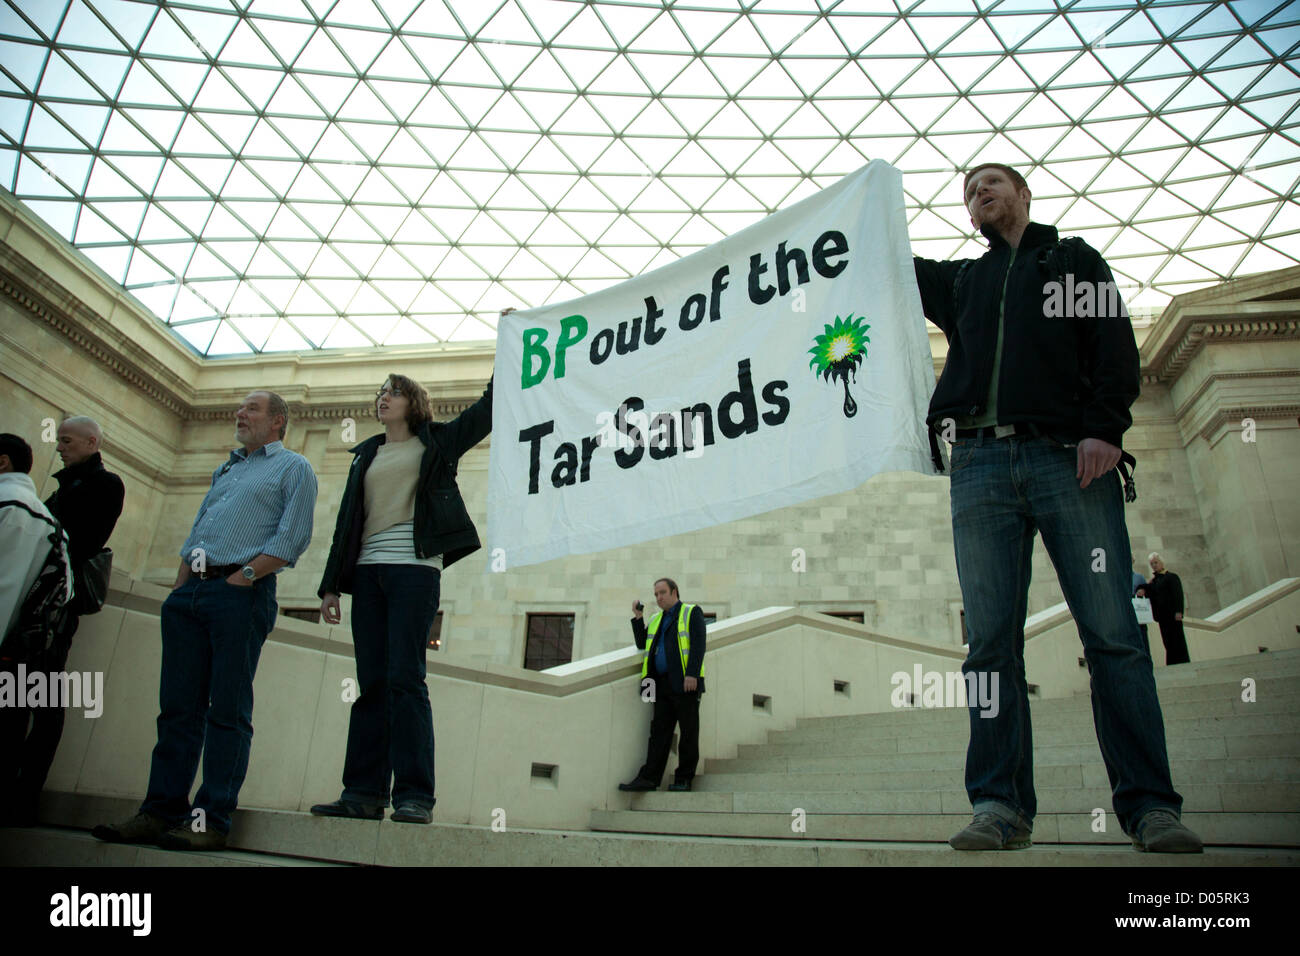 London, UK. Sunday 18th November 2012. Reclaim Shakespeare Company flashmob demonstrating in the British Museum’s Great Court against BP's (British Petroleum) sponsorship of the arts. Oil giant BP has a long-running financial relationship with the British Museum. The museum’s current ‘Shakespeare: Staging the World’ exhibition is sponsored by BP.  Despite the company’s decision to go into the ‘world’s most destructive project’ – the Tar Sands, the devastating Deepwater Horizon spill, and its eyeing-up of the vulnerable Arctic. Alamy Live News. Stock Photo